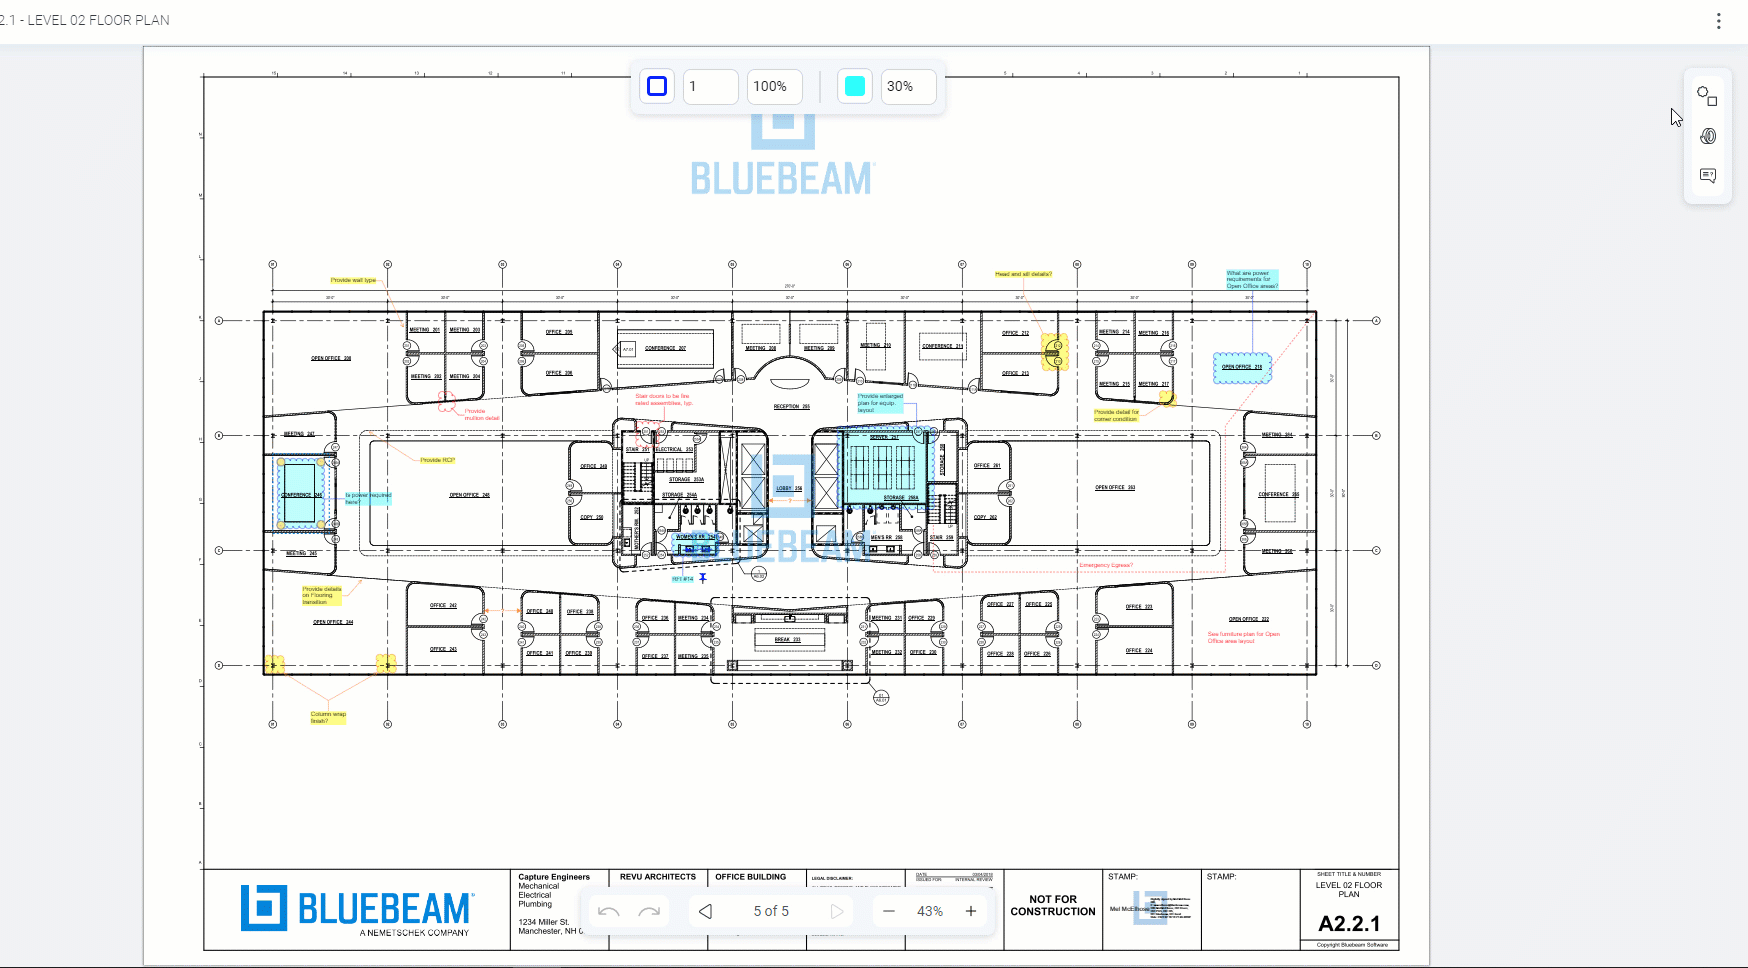 Comments and Shapes in Bluebeam Cloud